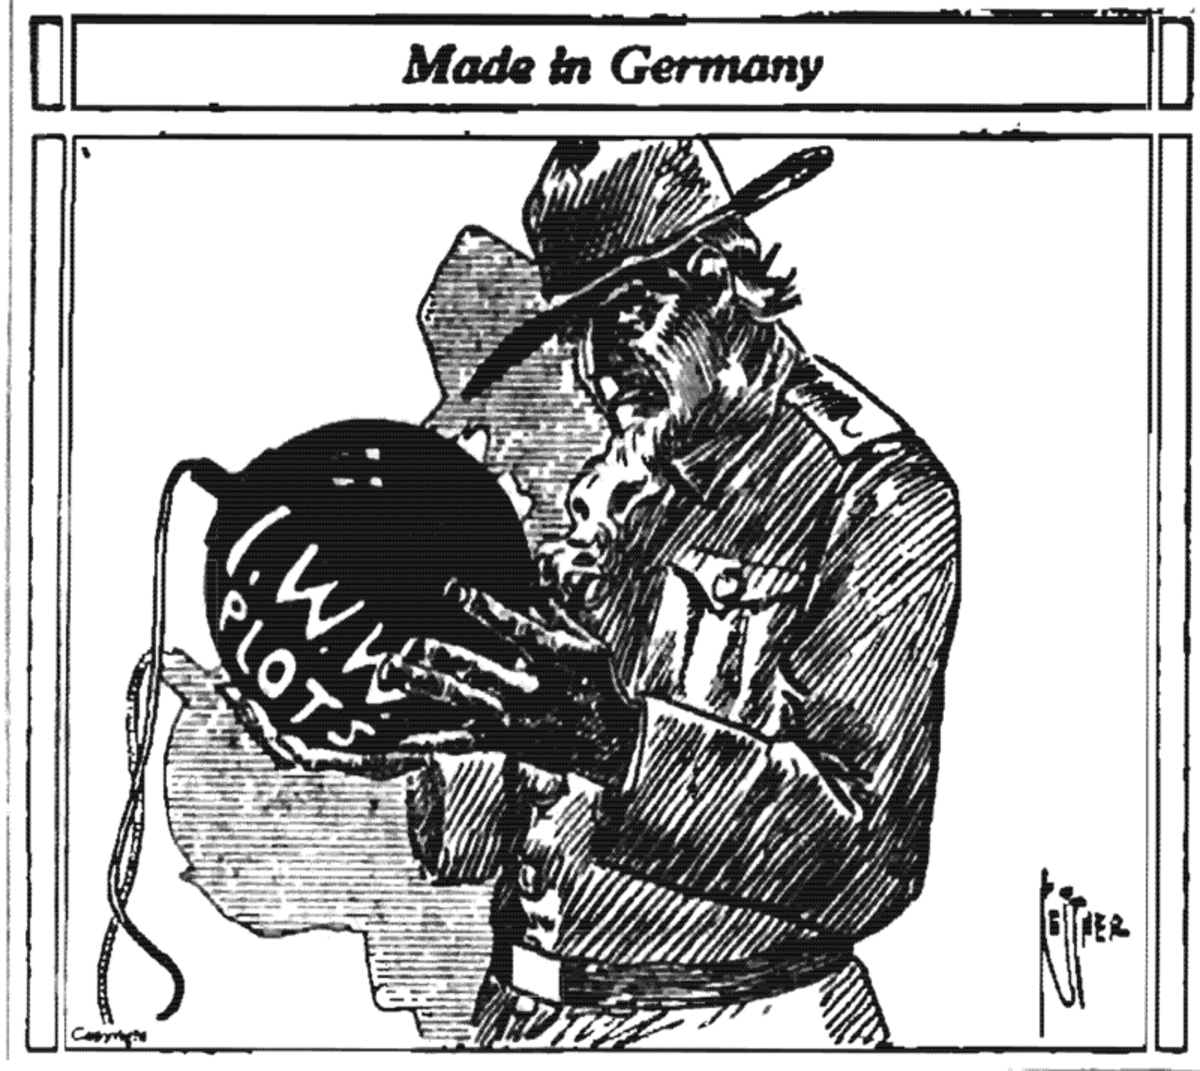 Newspaper cartoon from the Wyoming Examiner portraying the IWW as allies of Germany.